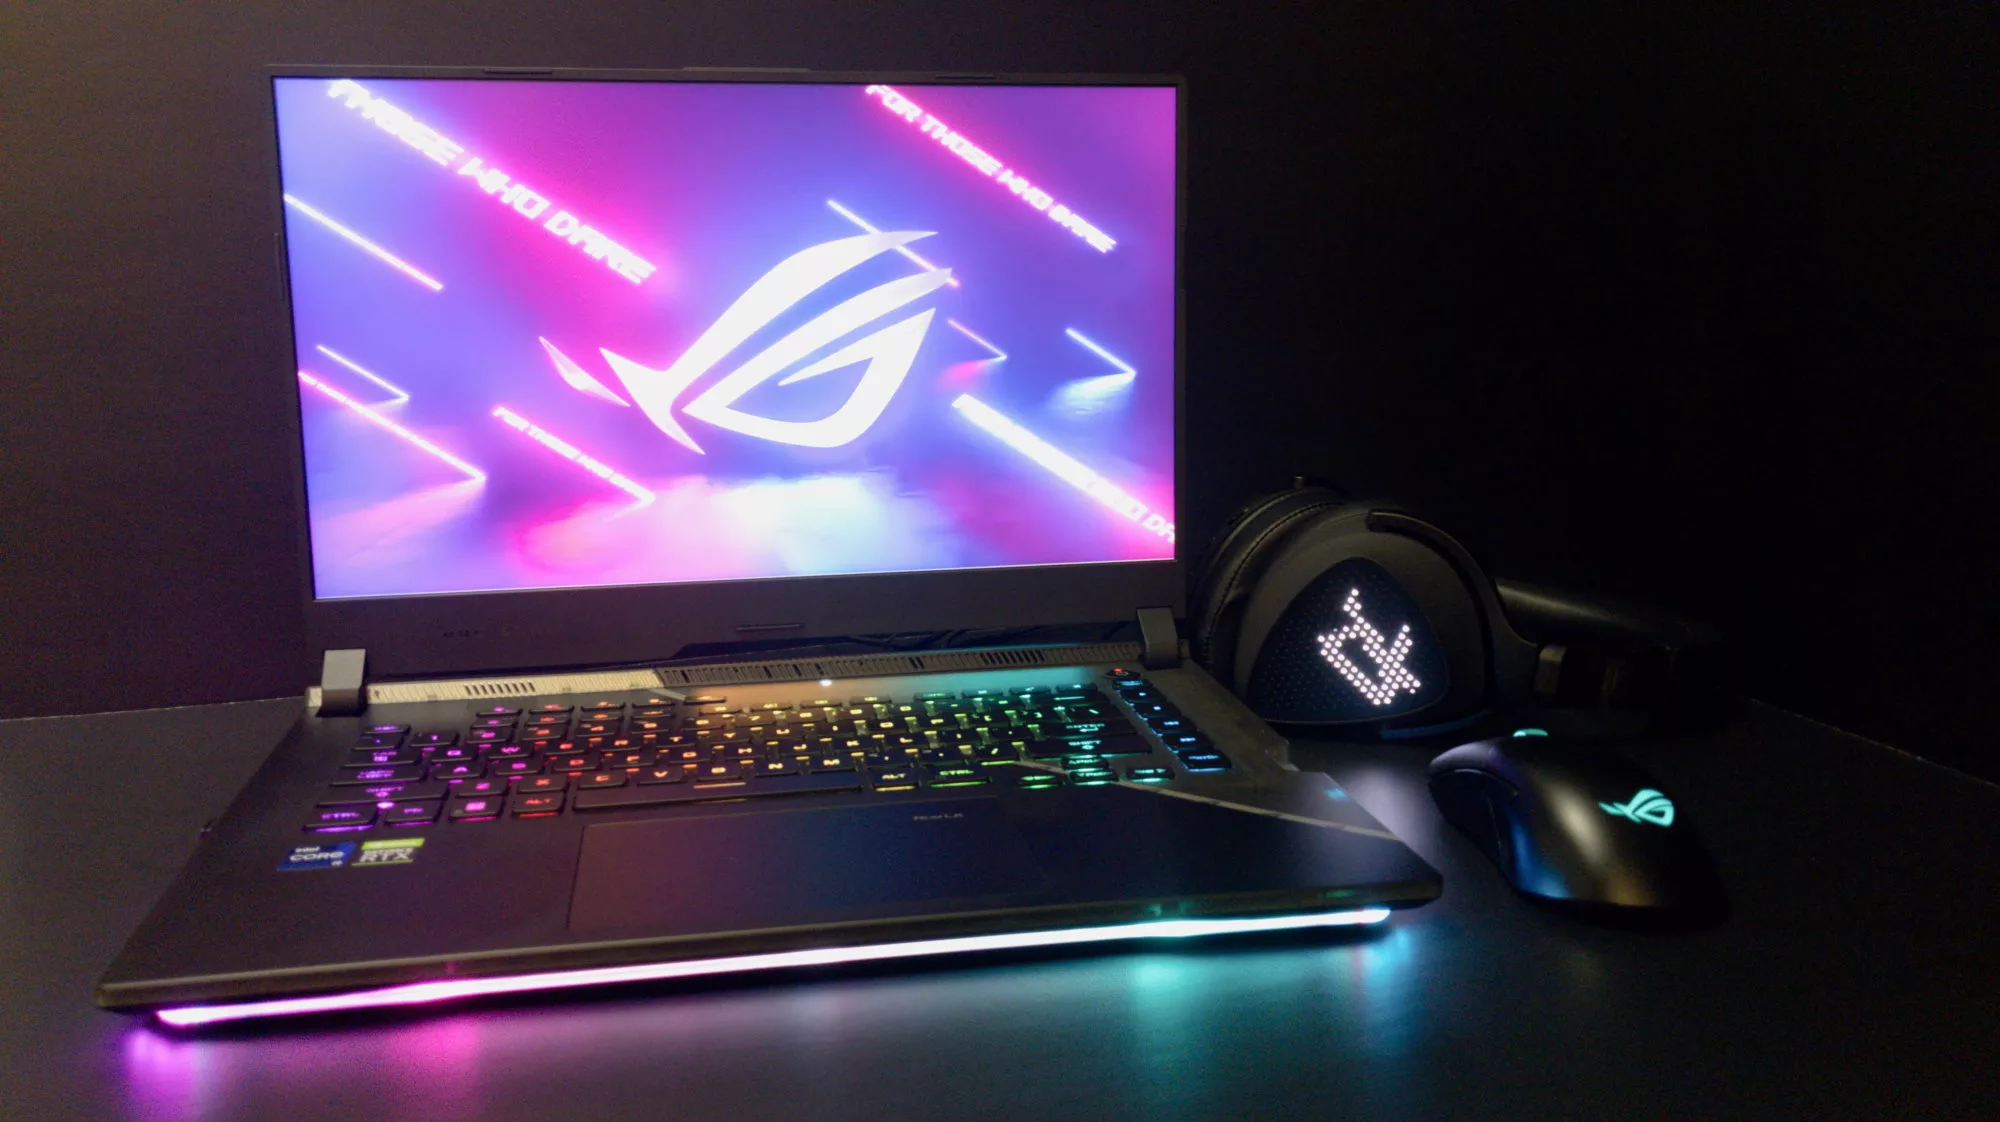 Ready to rumble out of the box Handson with the ROG Strix SCAR 15